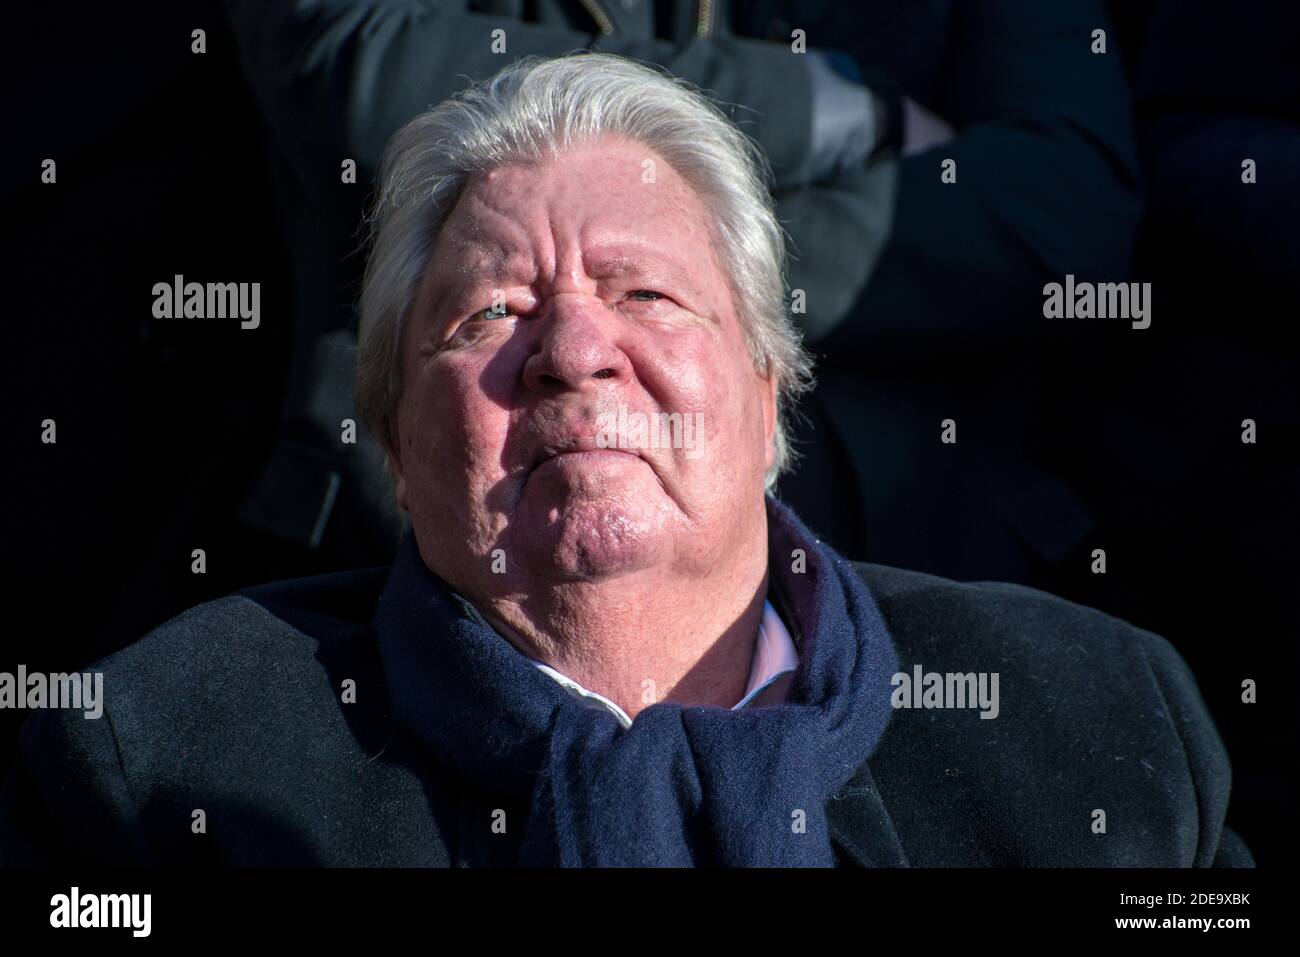 Jean-Jacques Sempe attends the unveiling of a wall fresco from one of his artwork at the crossing of Boulevard des Filles du Calvaire and Rue Froissard, 3rd District of Paris, France, Febuary 16, 2019. Photo by Denis PrezatAvenir Pictures/ABACAPRESS.COM Stock Photo